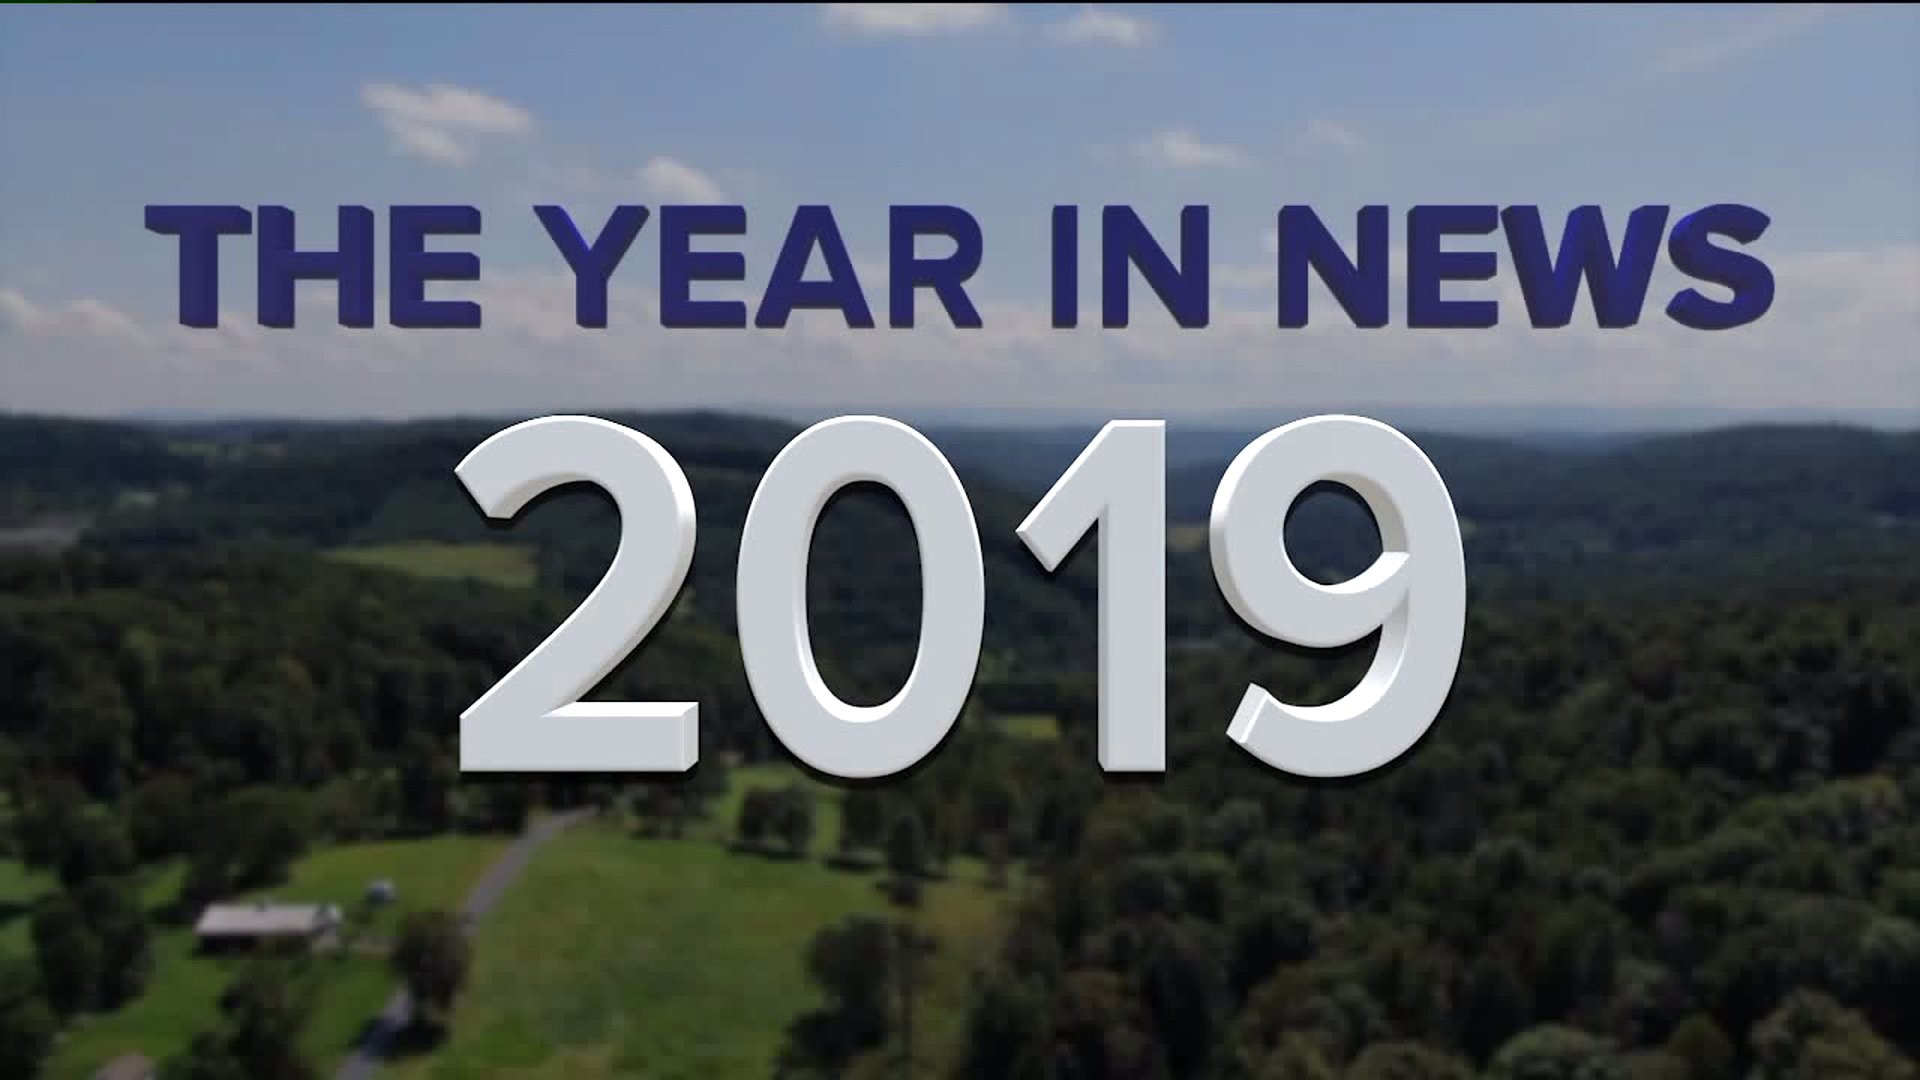 2019: The Year in News